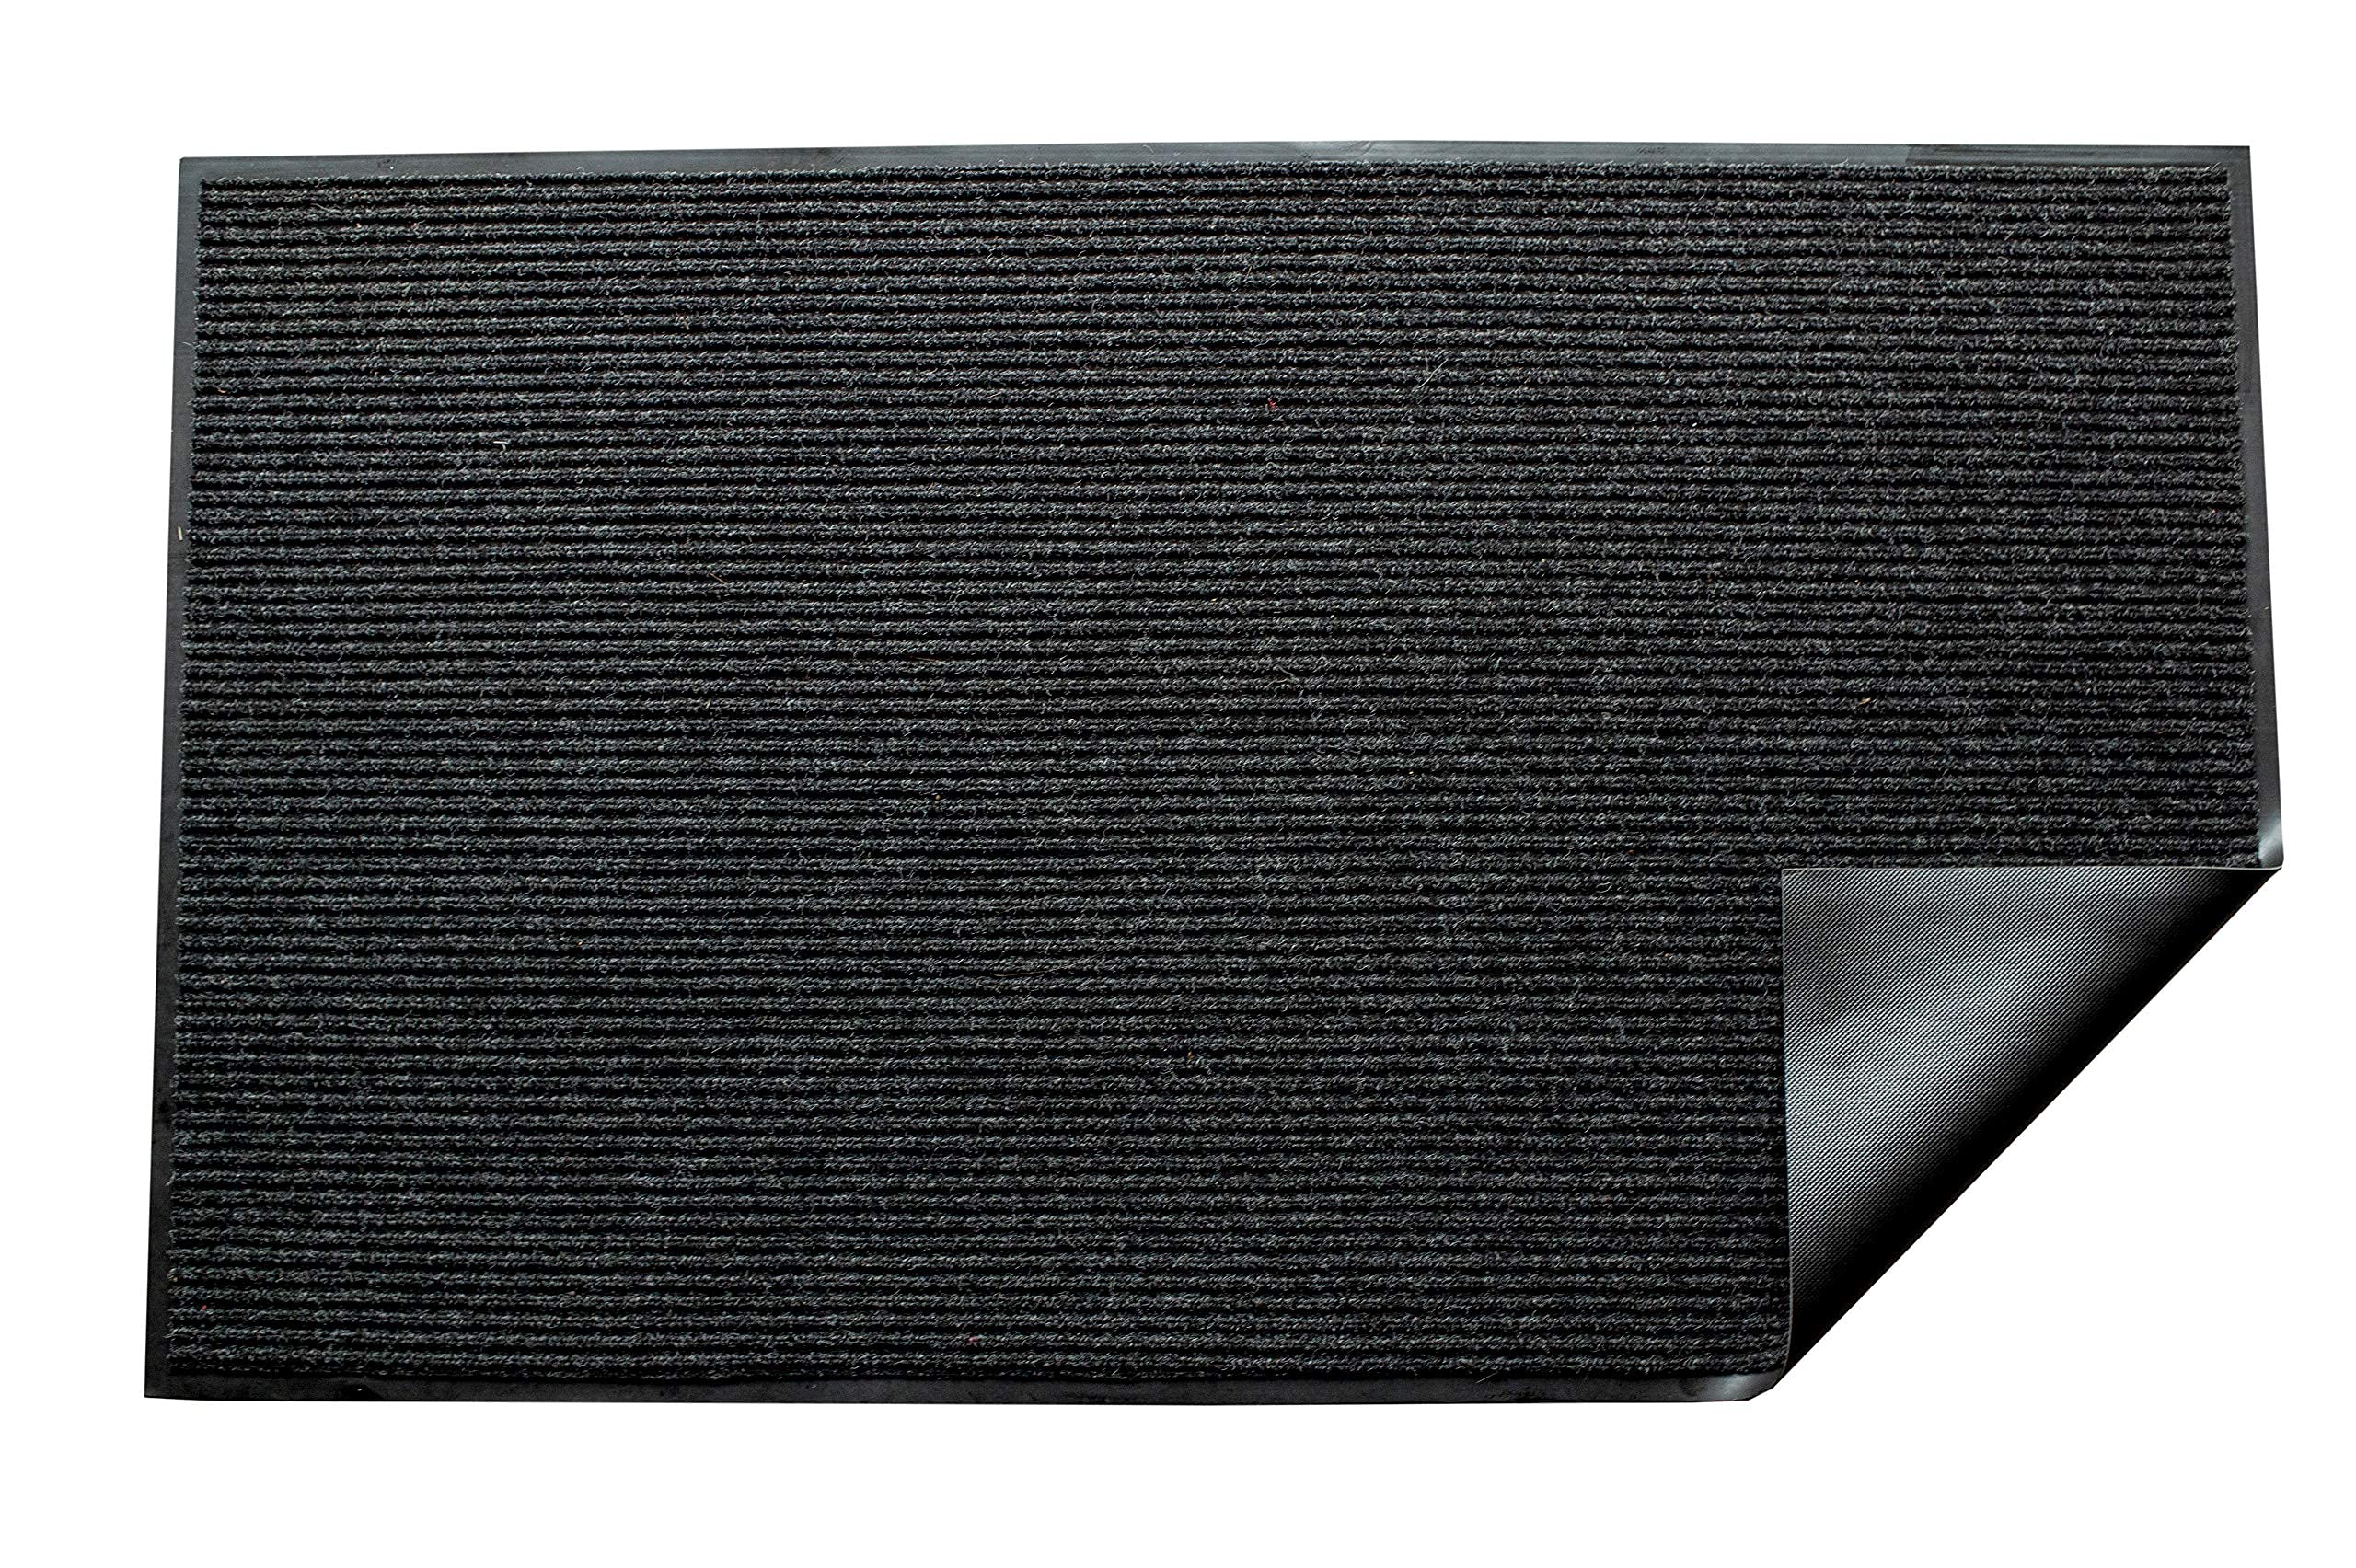 UNIMAT 3x5 (36"x60") Dual Ribbed Outdoor-Indoor Doormat with Waterproof Charcoal Rubber Backing - Stylish Welcome Mat, Perfect for Home, Office, and Kitchen Entrances